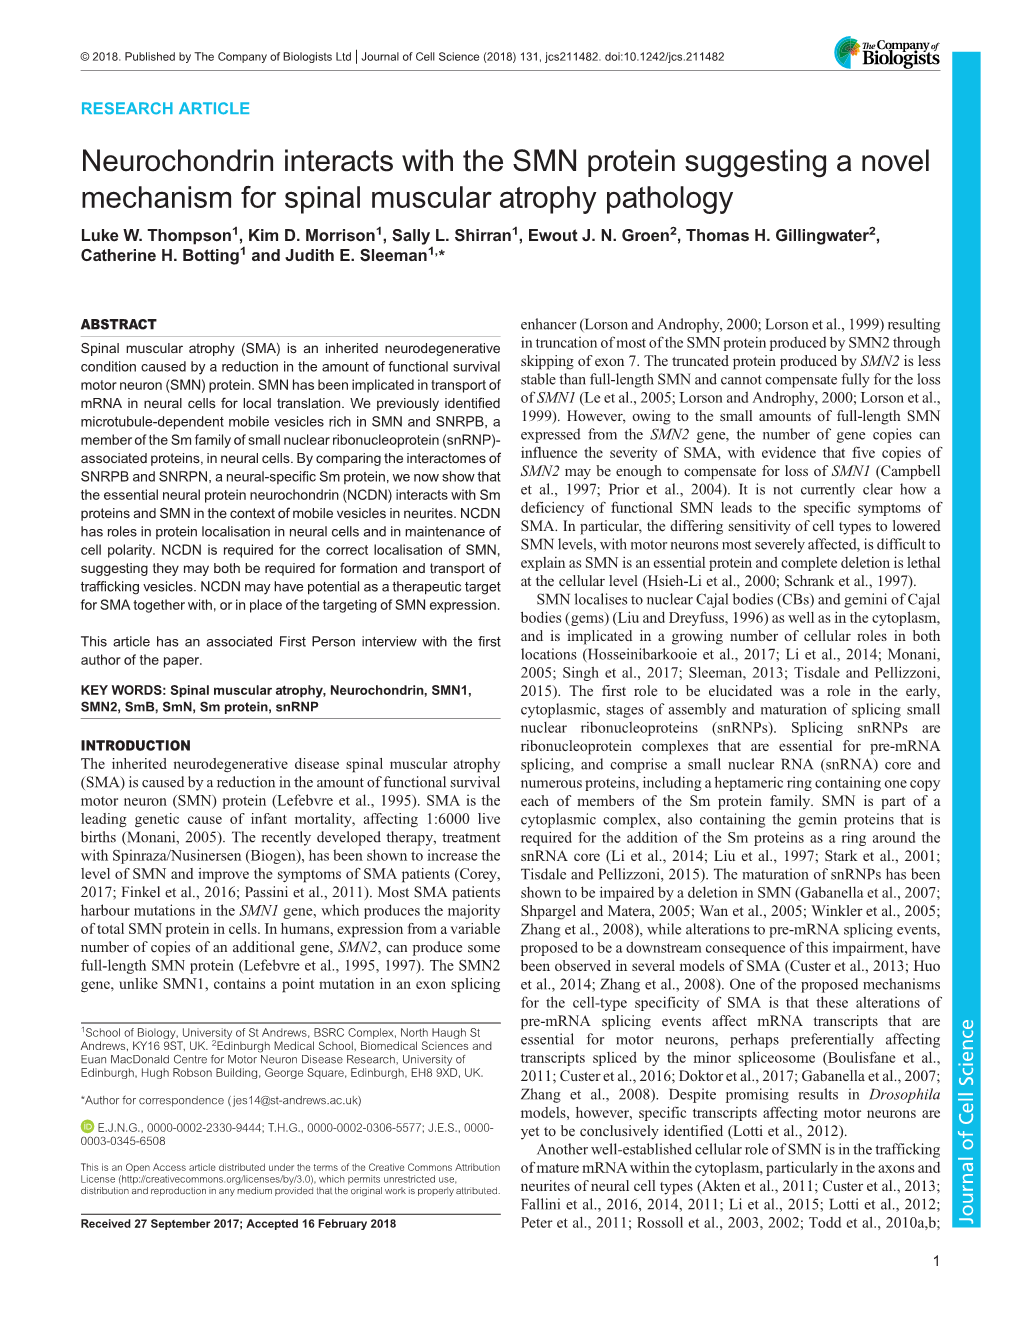 Neurochondrin Interacts with the SMN Protein Suggesting a Novel Mechanism for Spinal Muscular Atrophy Pathology Luke W